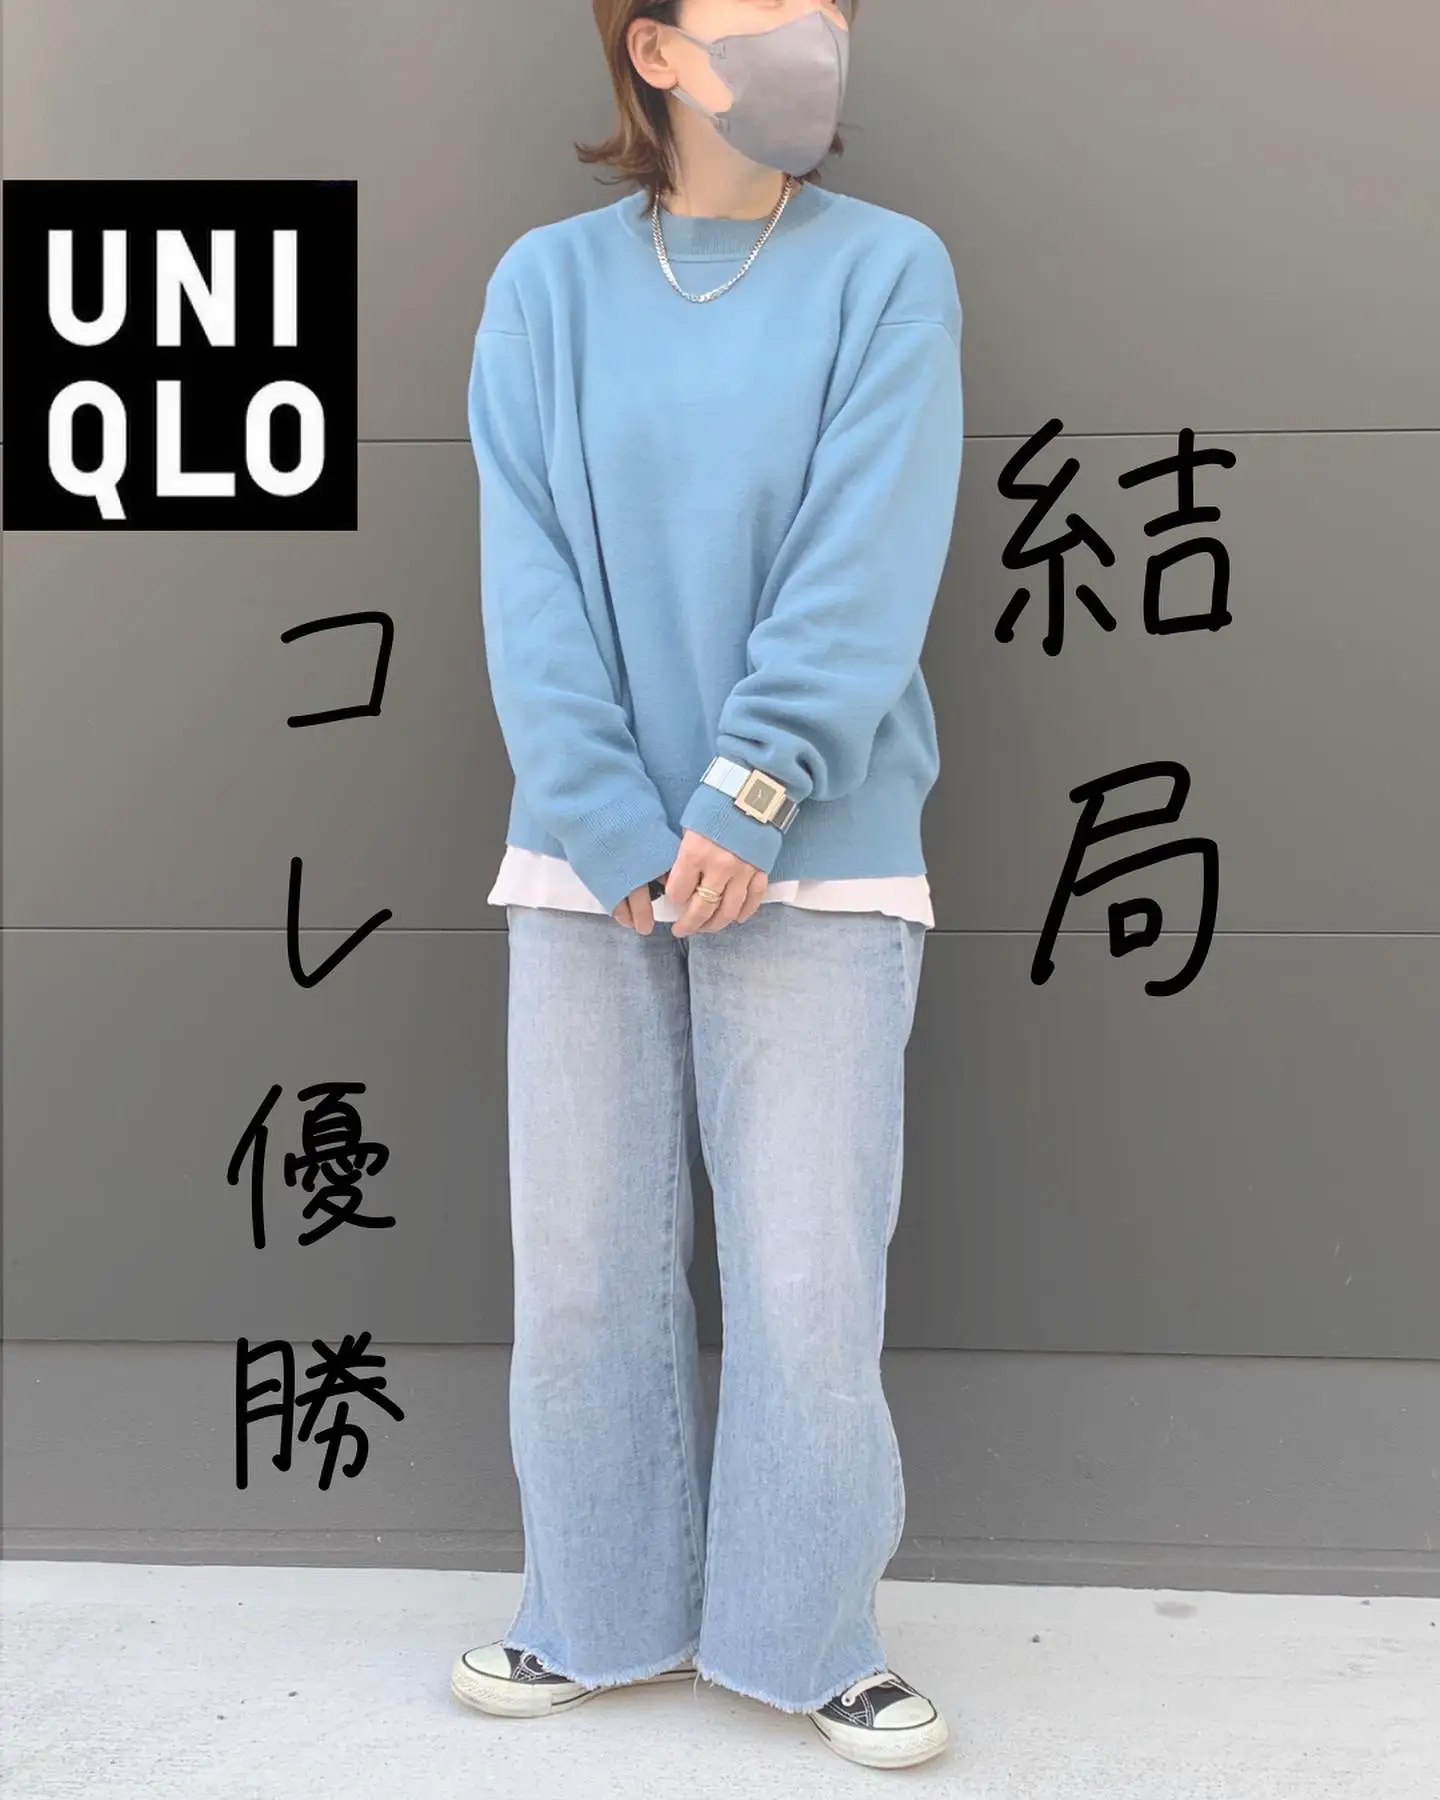 UNIQLO Philippines on X: Experience all day support in a variety